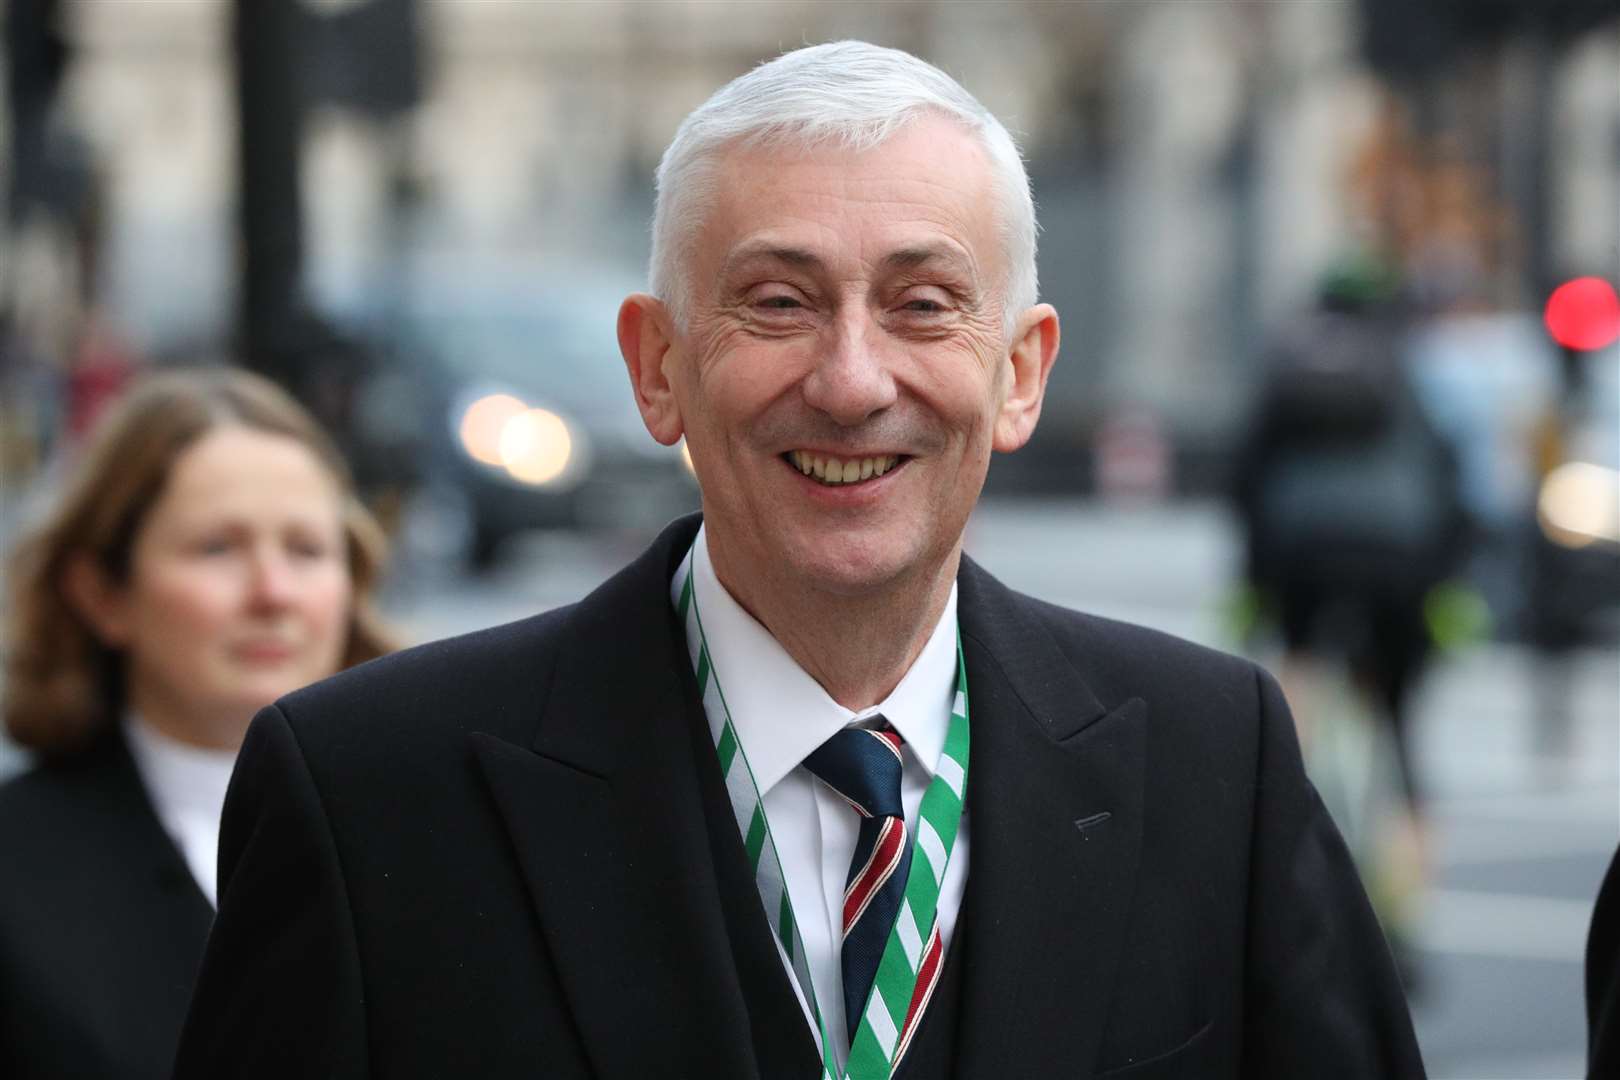 Commons Speaker Sir Lindsay Hoyle defended the extra money offered to MPs (Jonathan Brady/PA Wire)